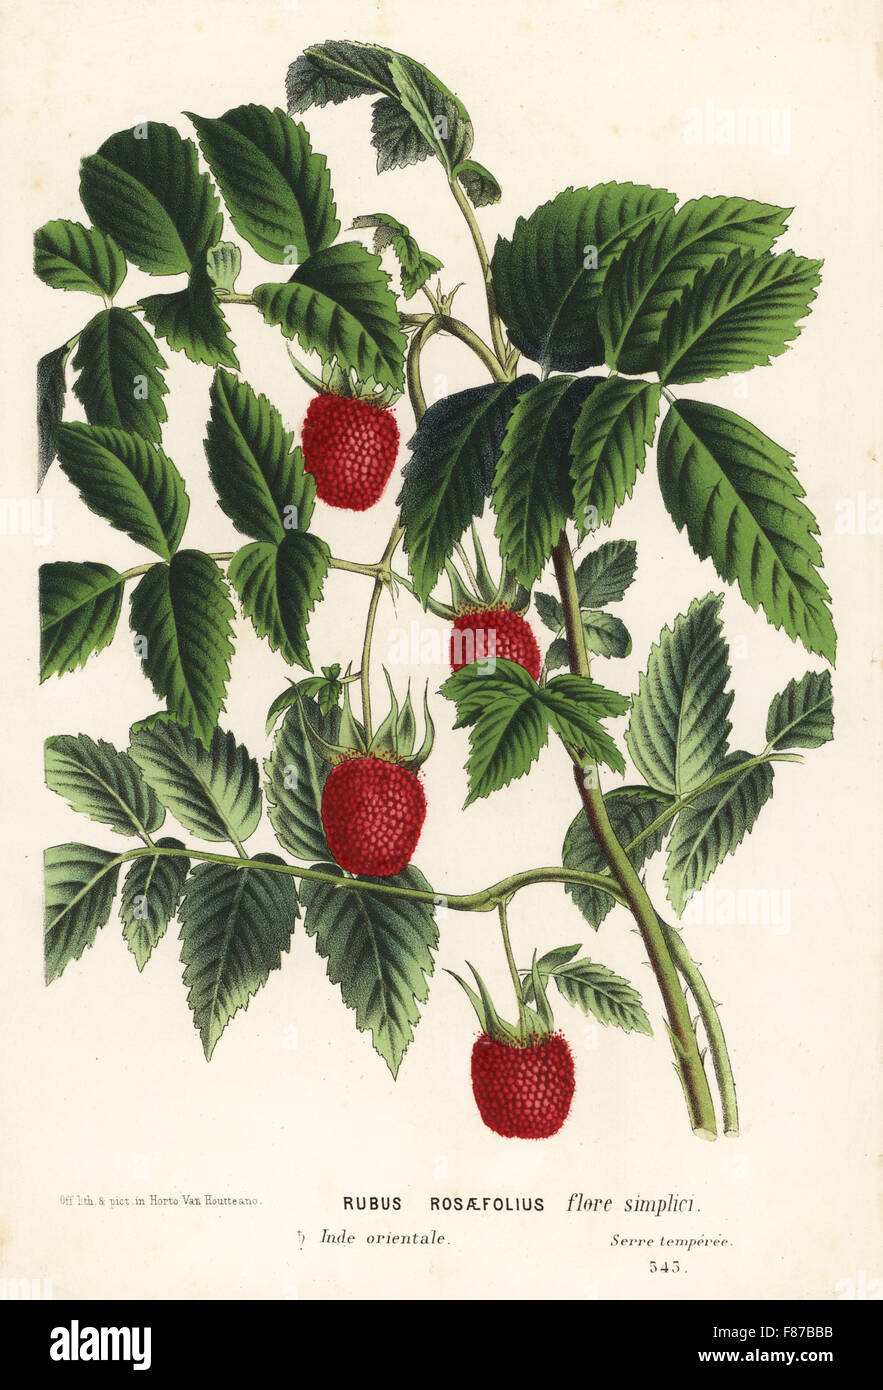 Roseleaf bramble or West Indian raspberry, Rubus rosifolius (Rubus rosaefolius flore simplici). Handcoloured lithograph from Louis van Houtte and Charles Lemaire's Flowers of the Gardens and Hothouses of Europe, Flore des Serres et des Jardins de l'Europe, Ghent, Belgium, 1867-1868. Stock Photo